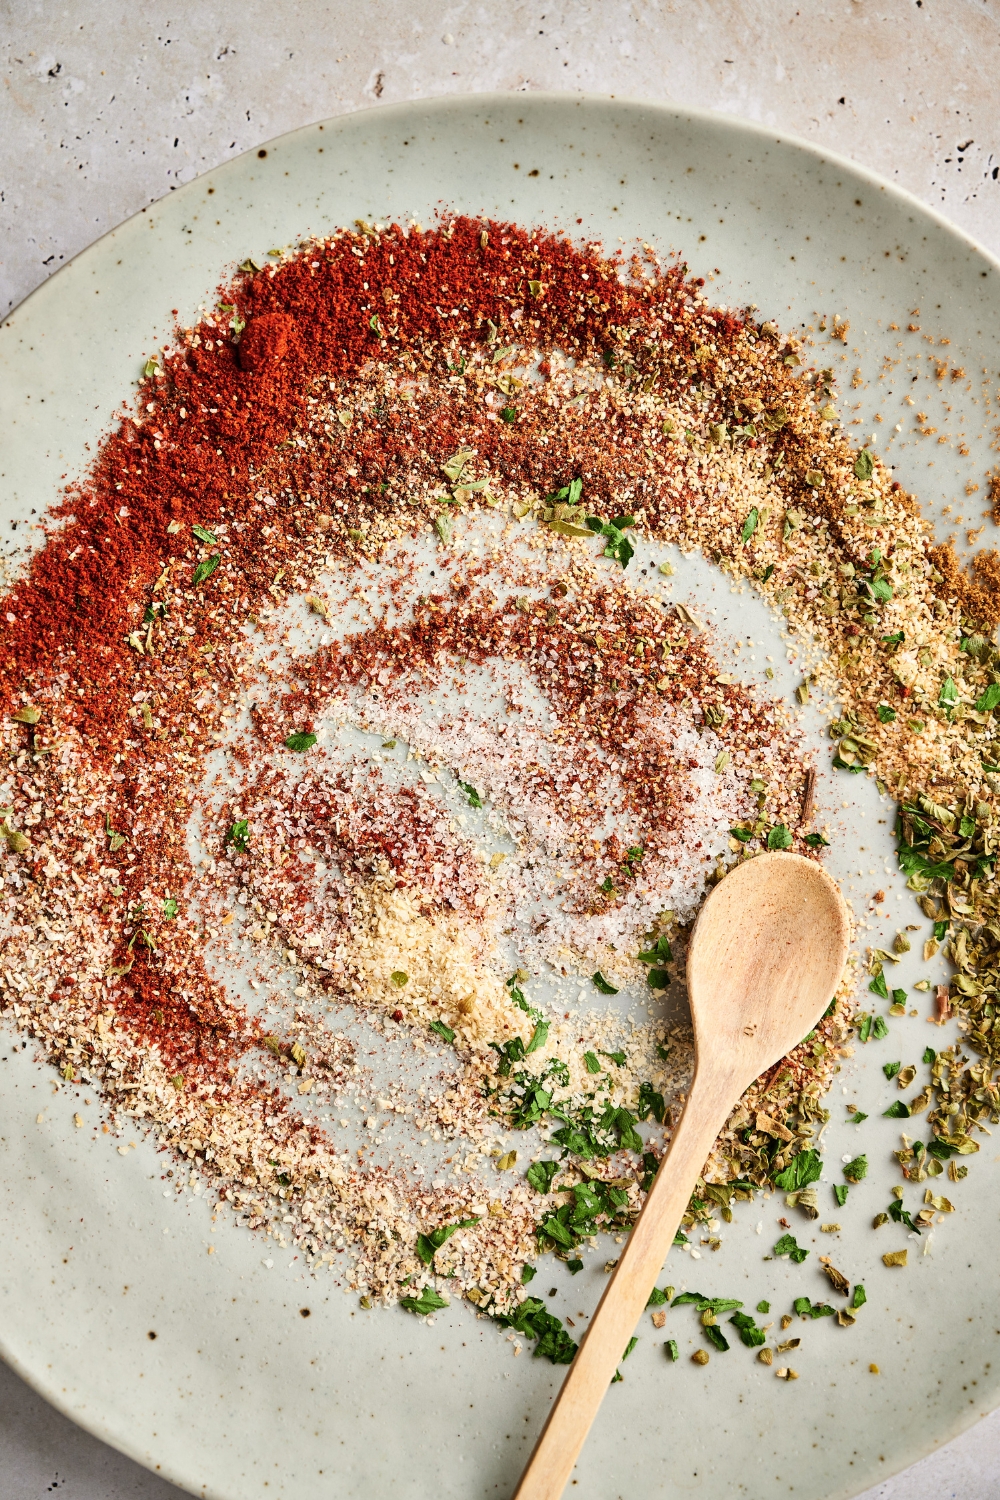 The spices for the cajun two step seasoning have been swirled together on a large gray plate. A wooden spoon is resting in the plate.